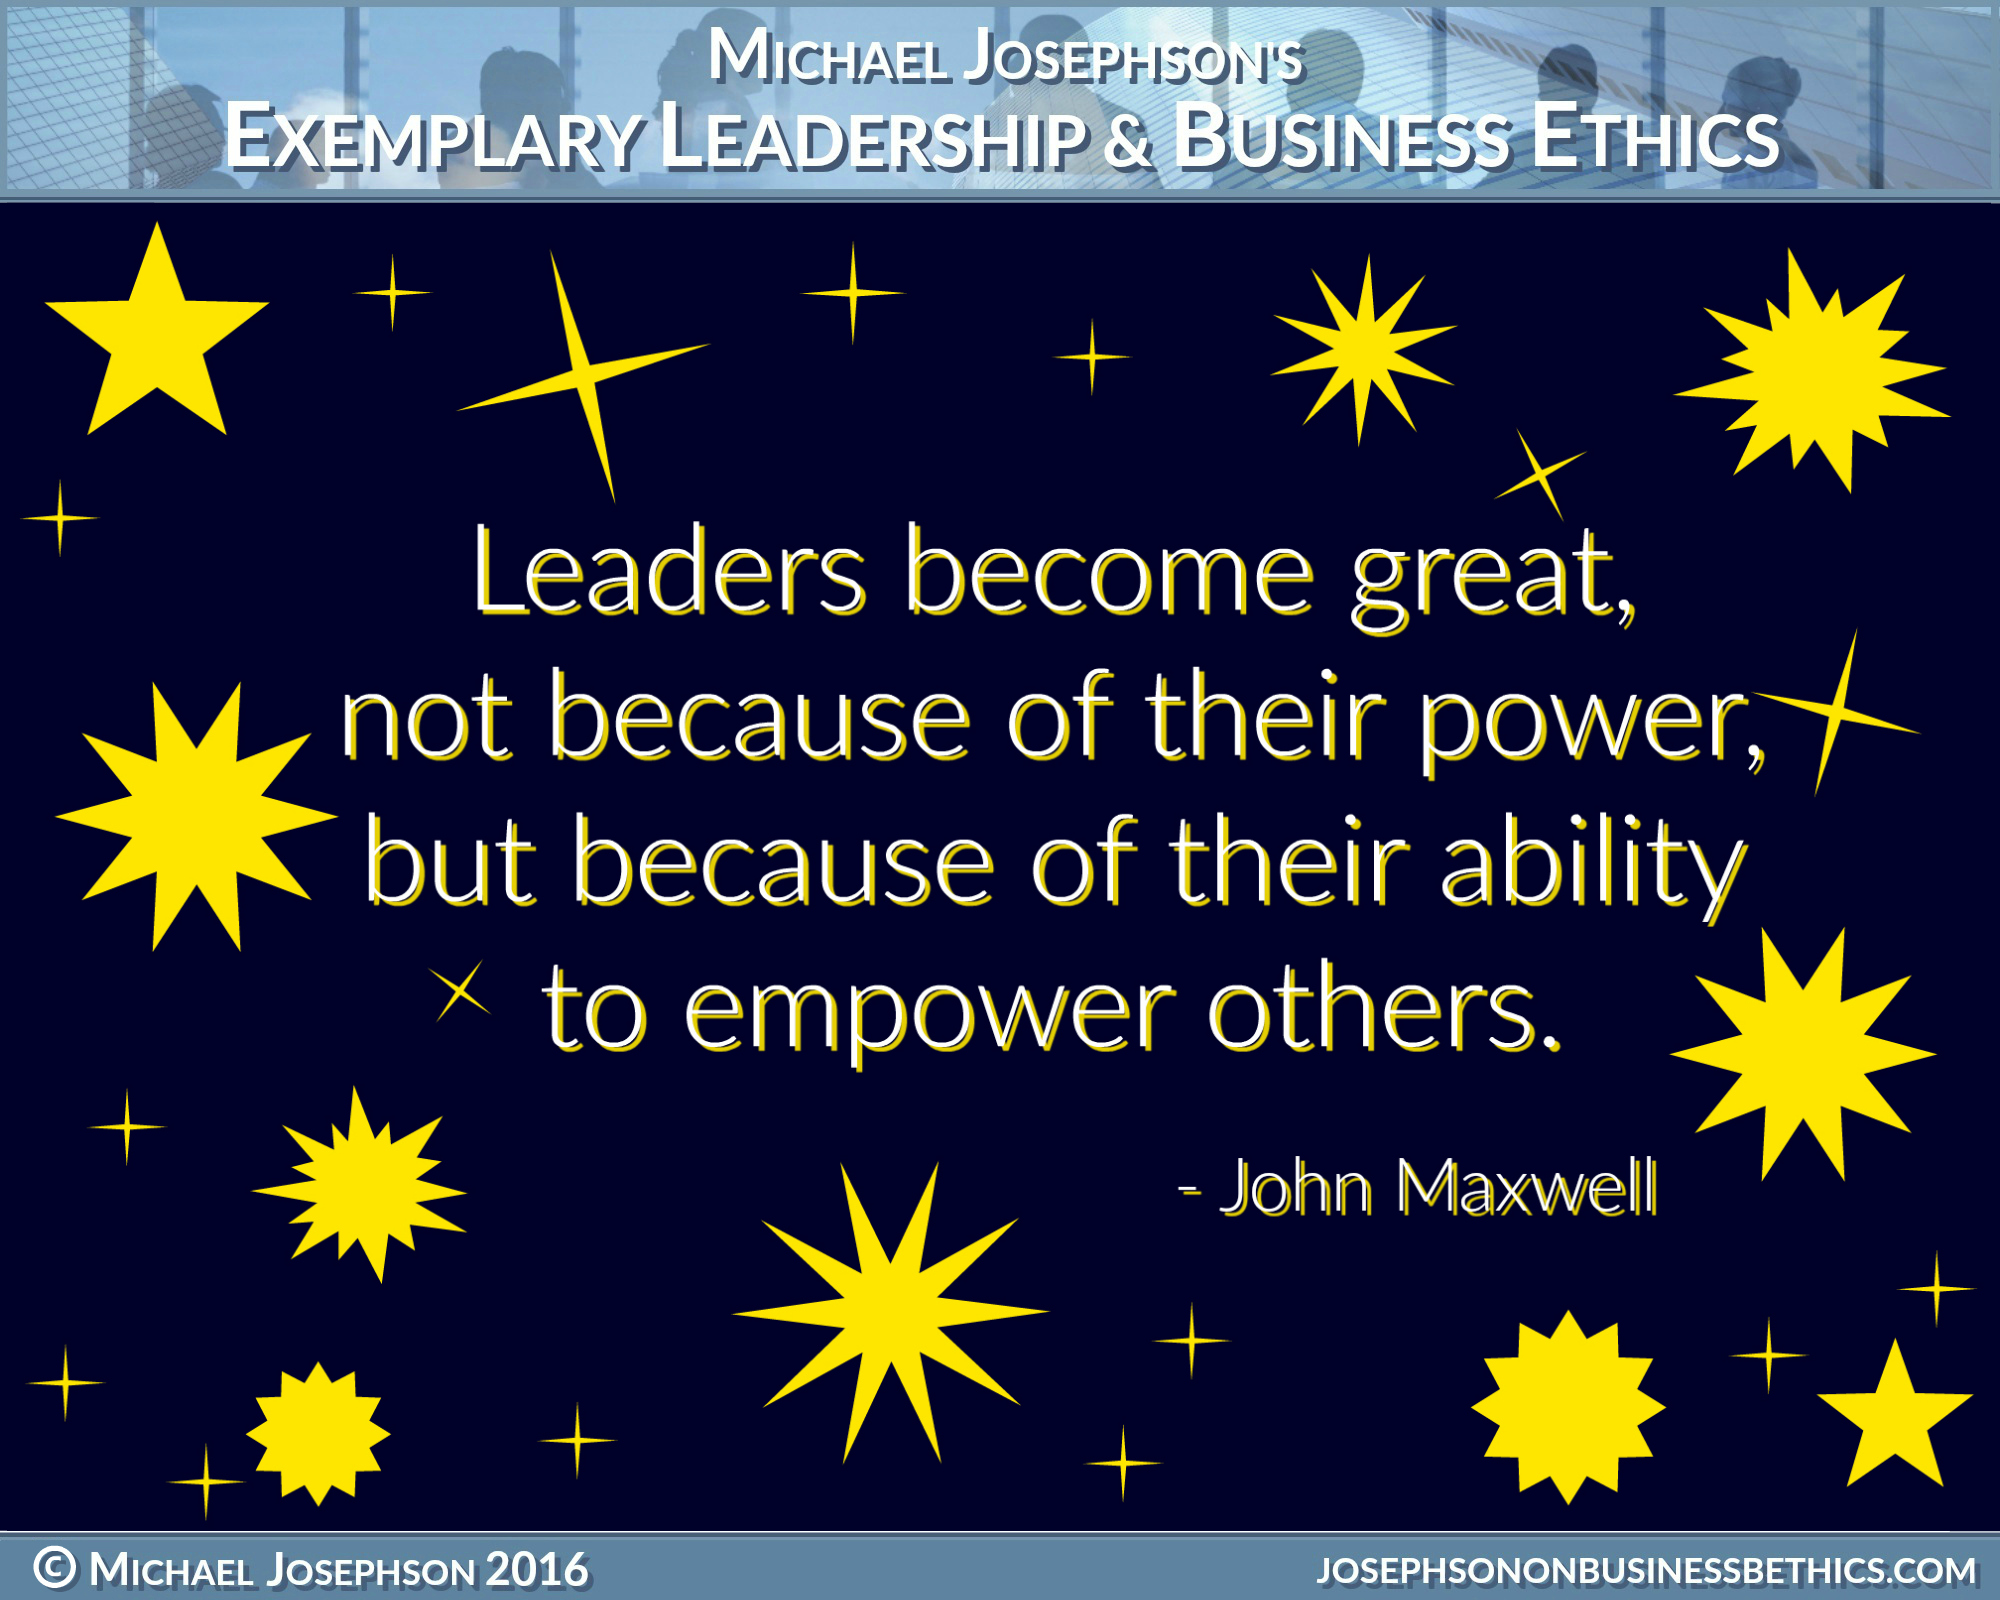 BEST EVER POSTER QUOTES ON LEADERSHIP - Exemplary Business Ethics